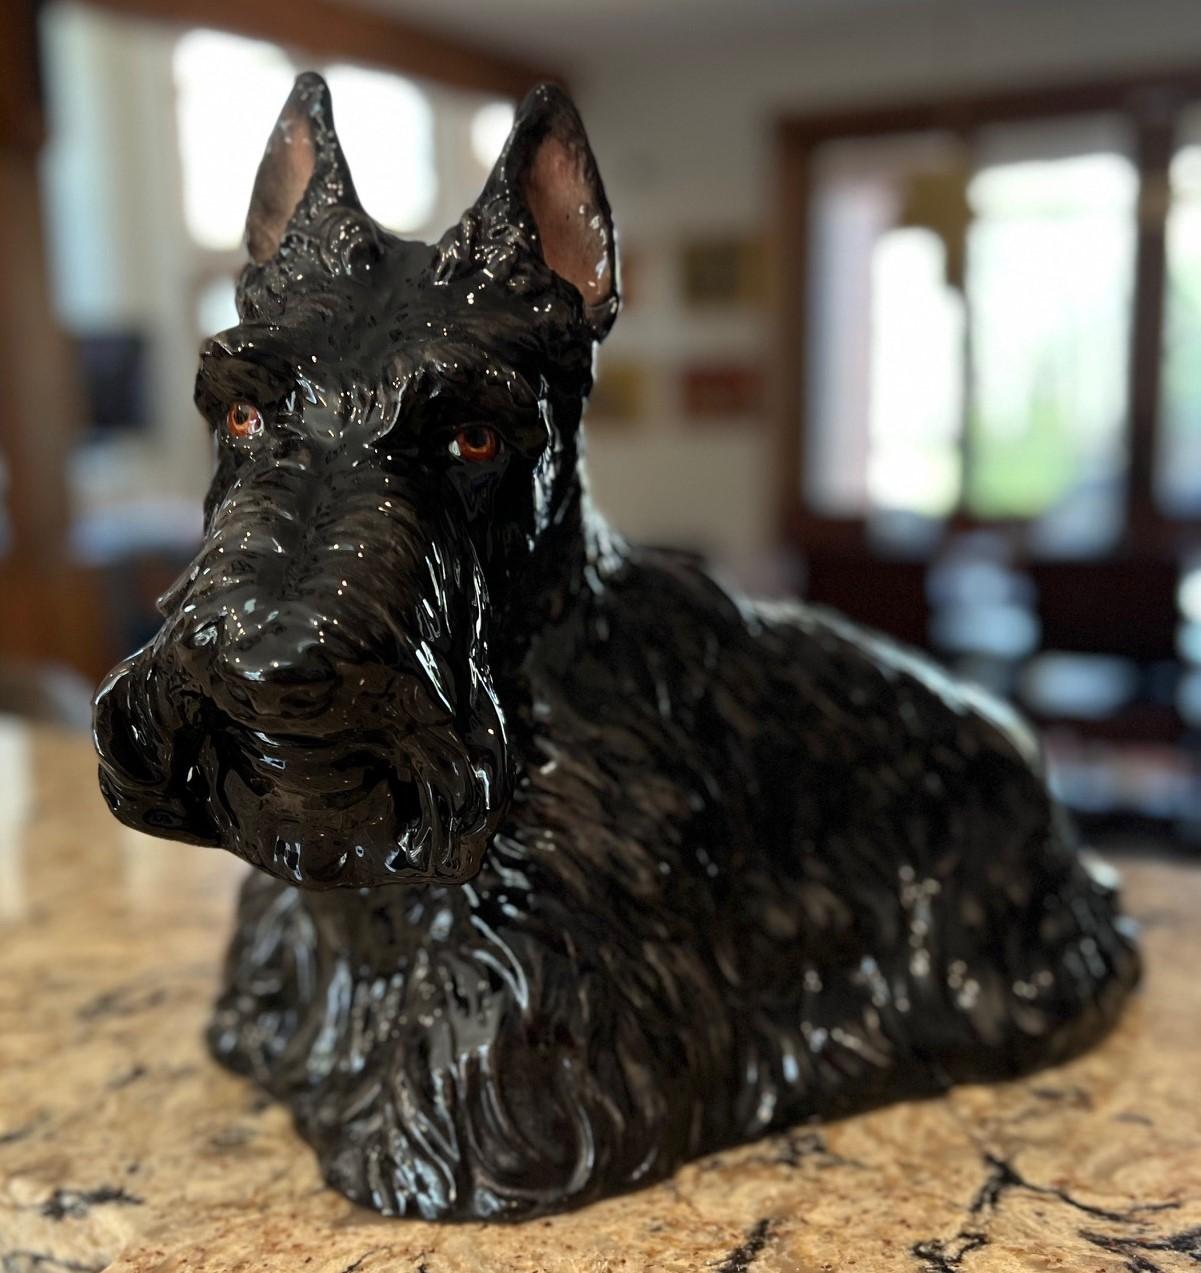 Vintage 1970's American sculpted ceramic Scottish Terrier figure by The Townsends. Depicted in a seated position this Scottie dog has been sculpted with incredible lifelike details. The resultant ceramic is crisp and has been painted and glazed to 